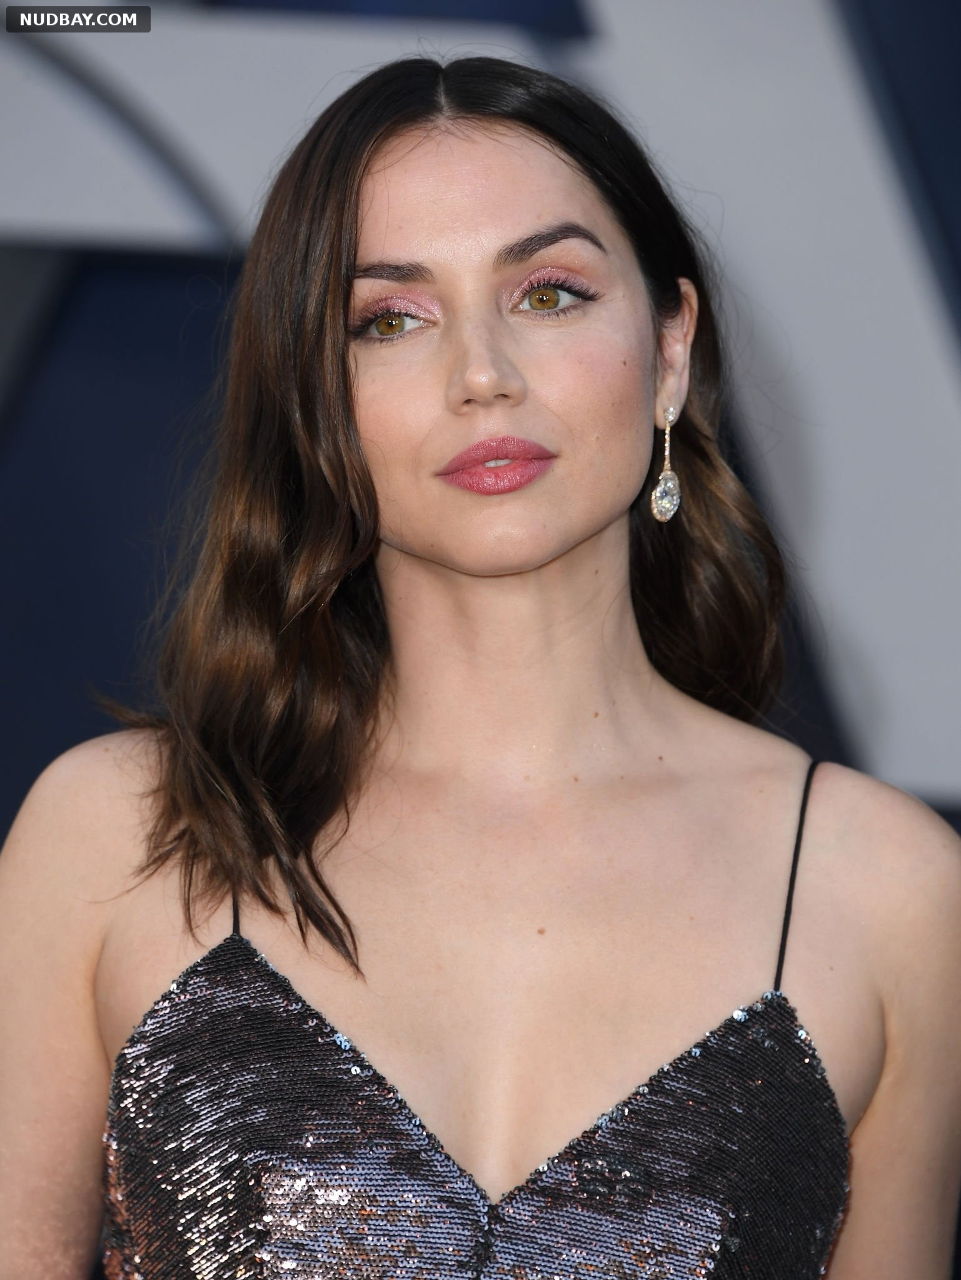 Ana De Armas Cleavage attending the premiere of The Gray Man in Los Angeles Jul 13 2022